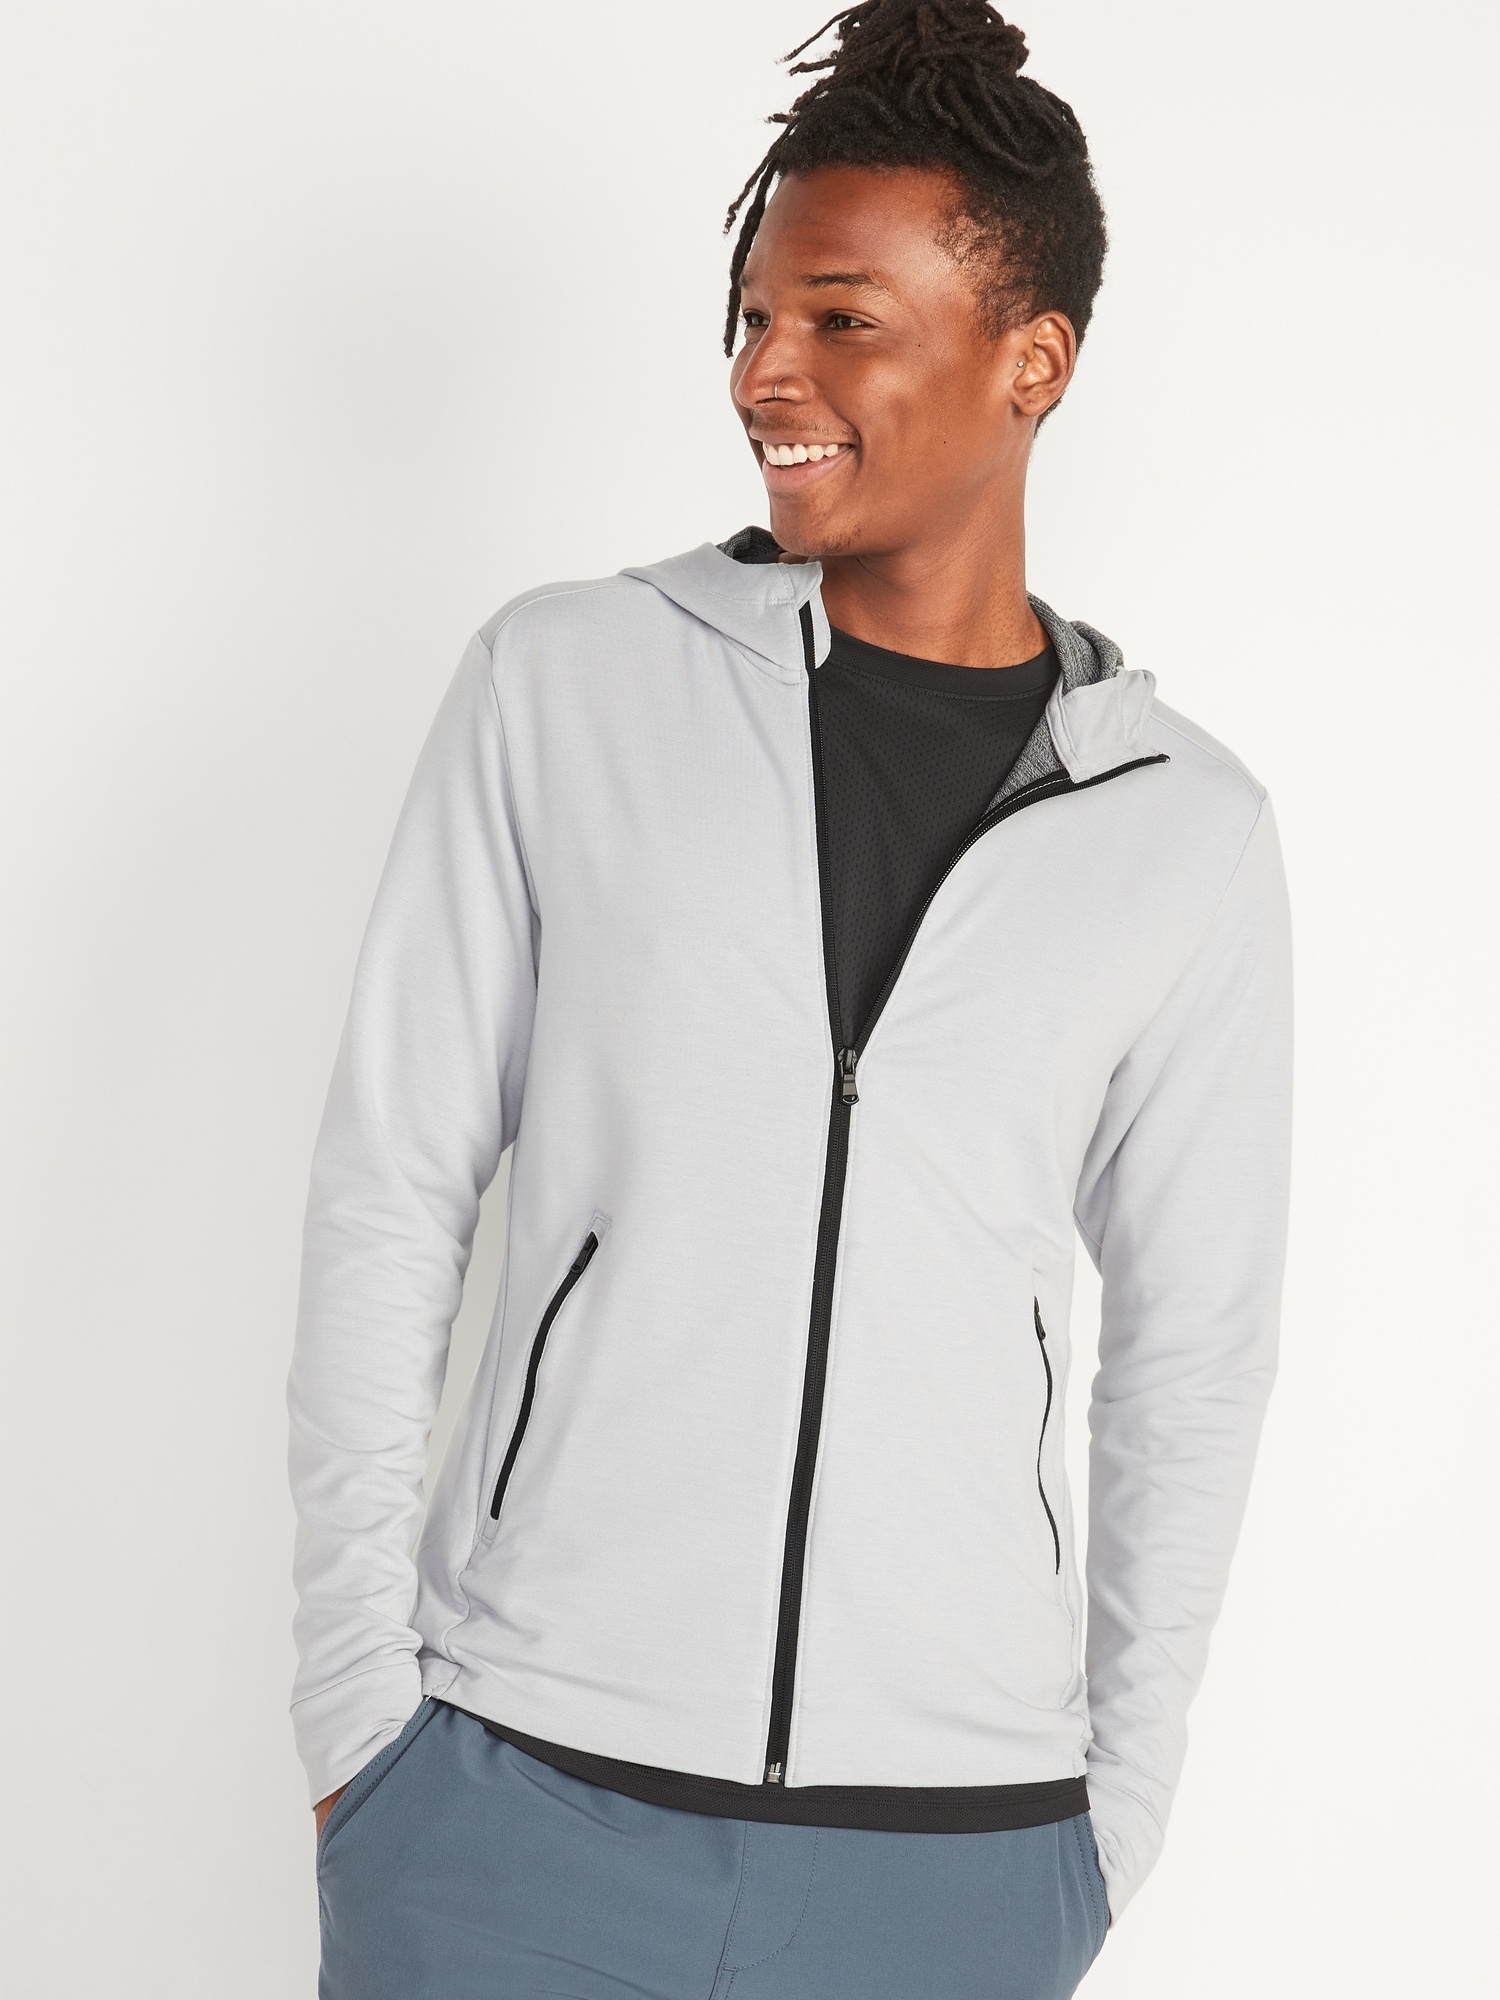 Old Navy Live-In French Terry Go-Dry Zip Hoodie for Men gray. 1